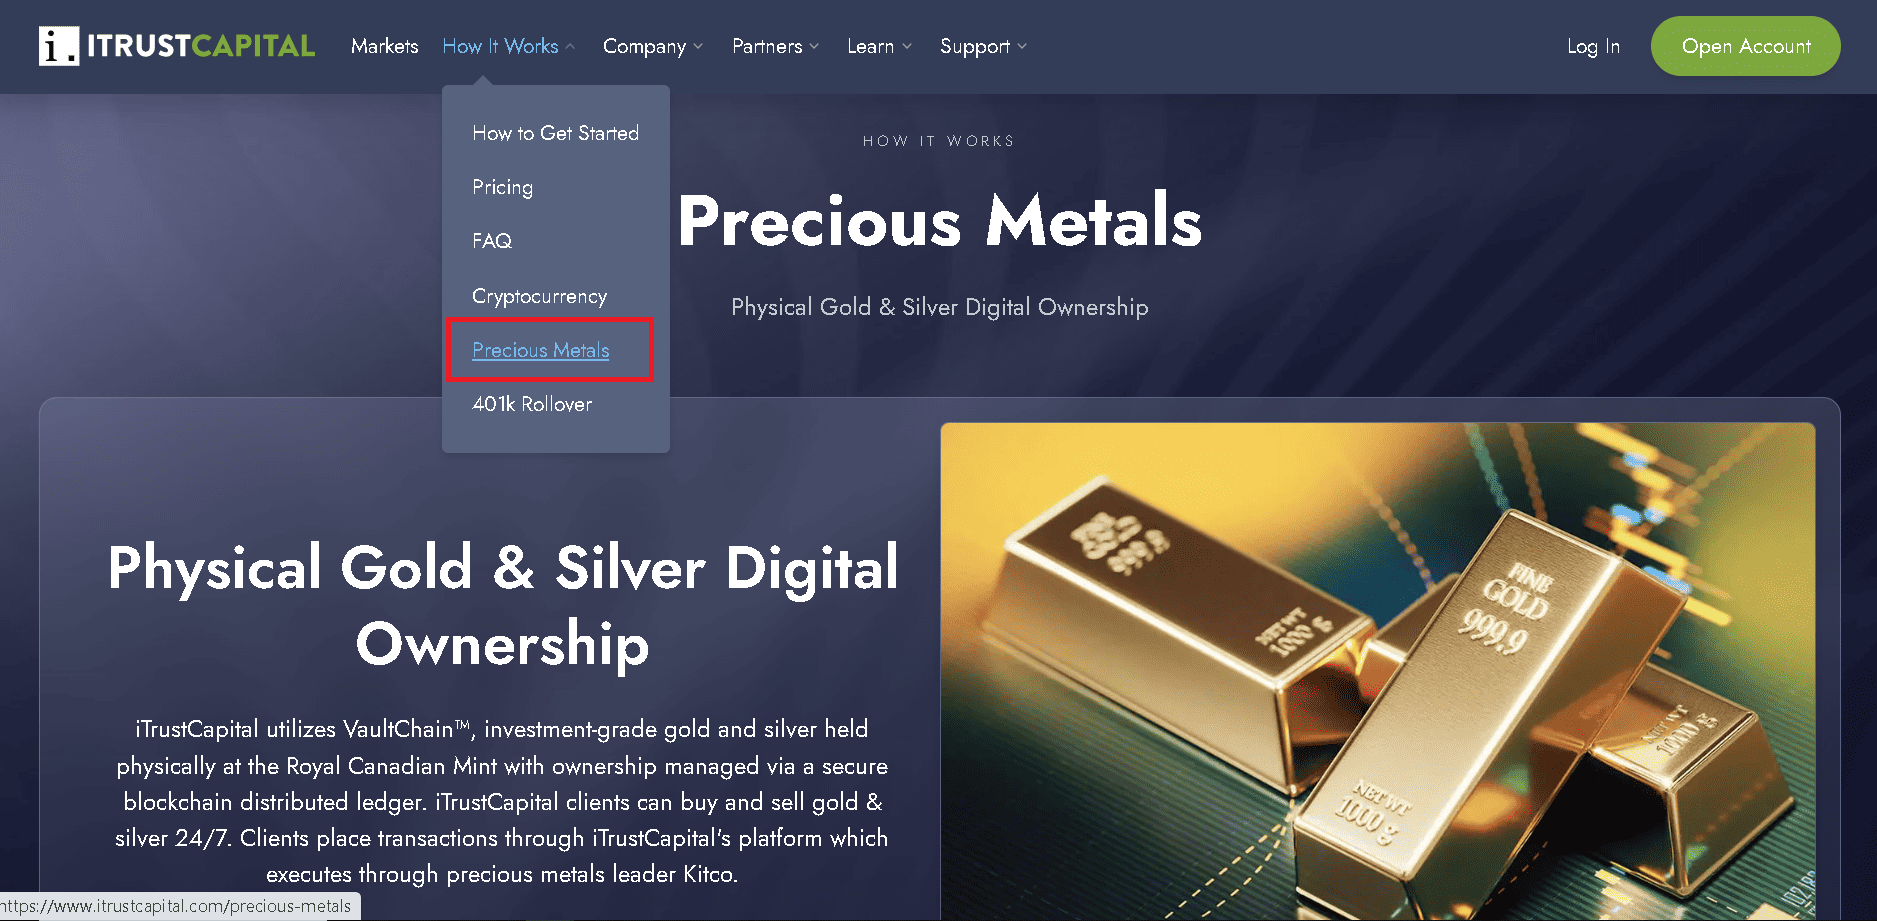 I don't recommend you use iTrustCapital as your gold and silver IRA company of choice